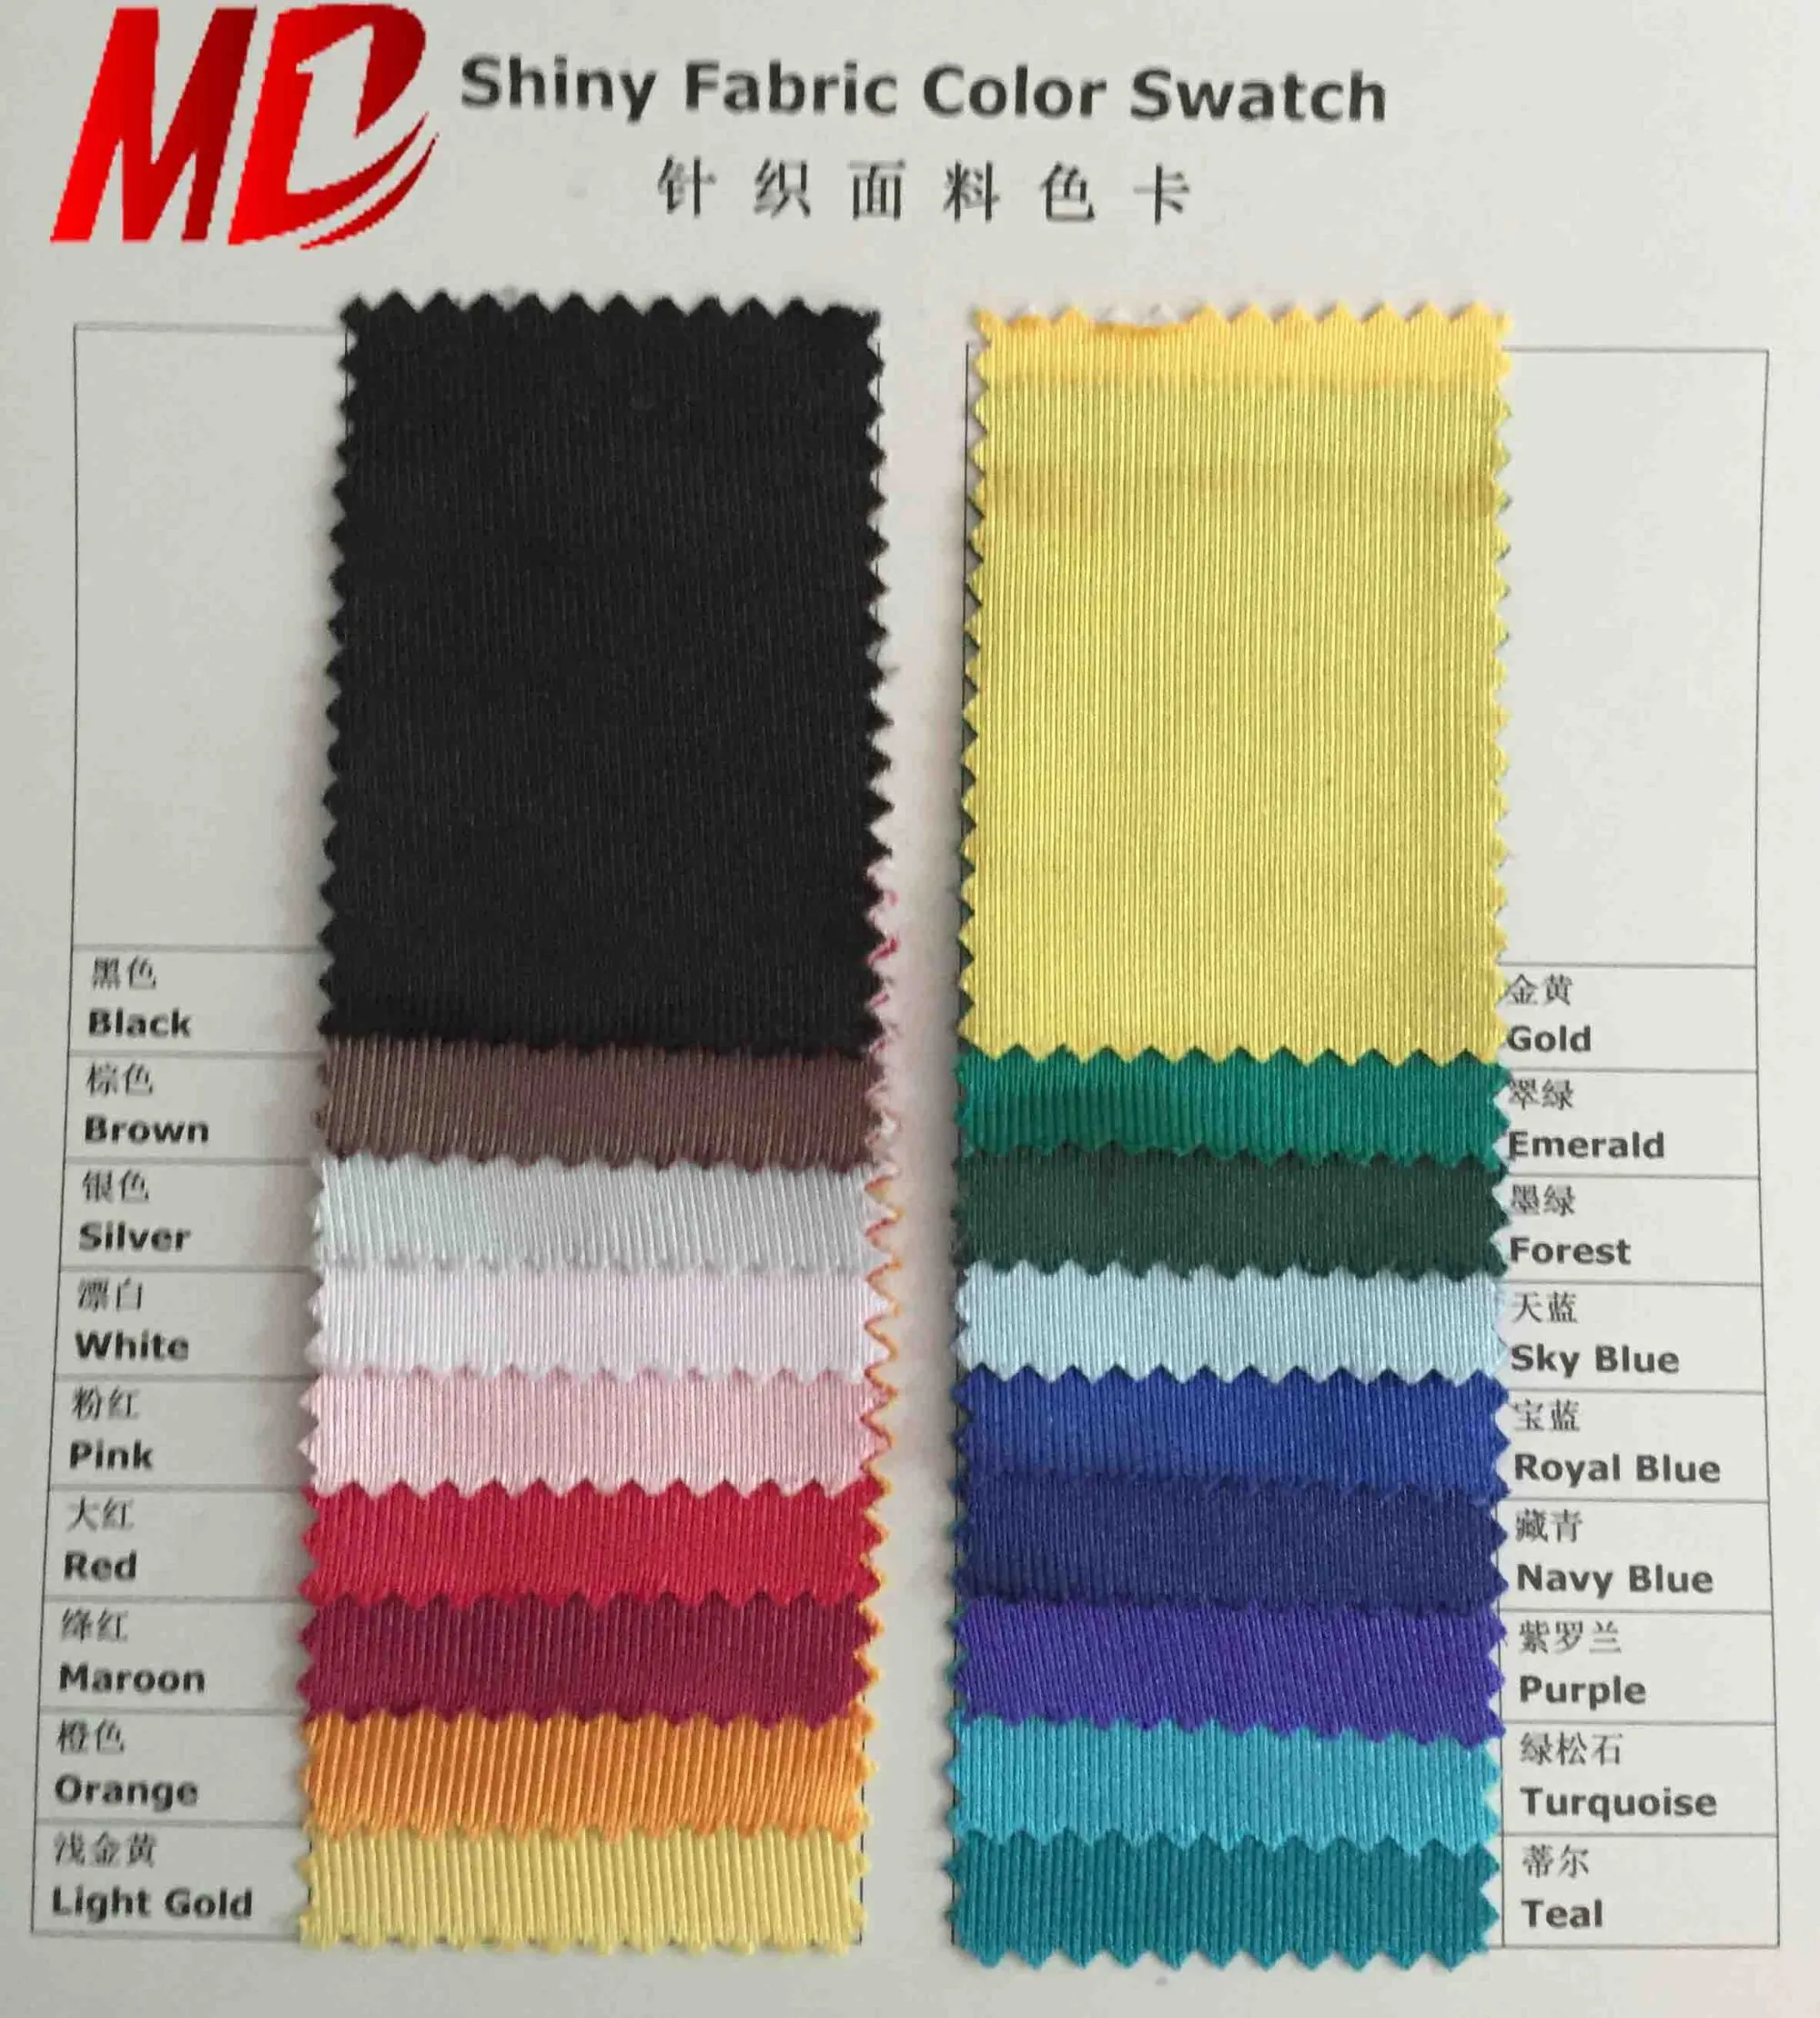 SHINY FABRIC COLOR SWATCH